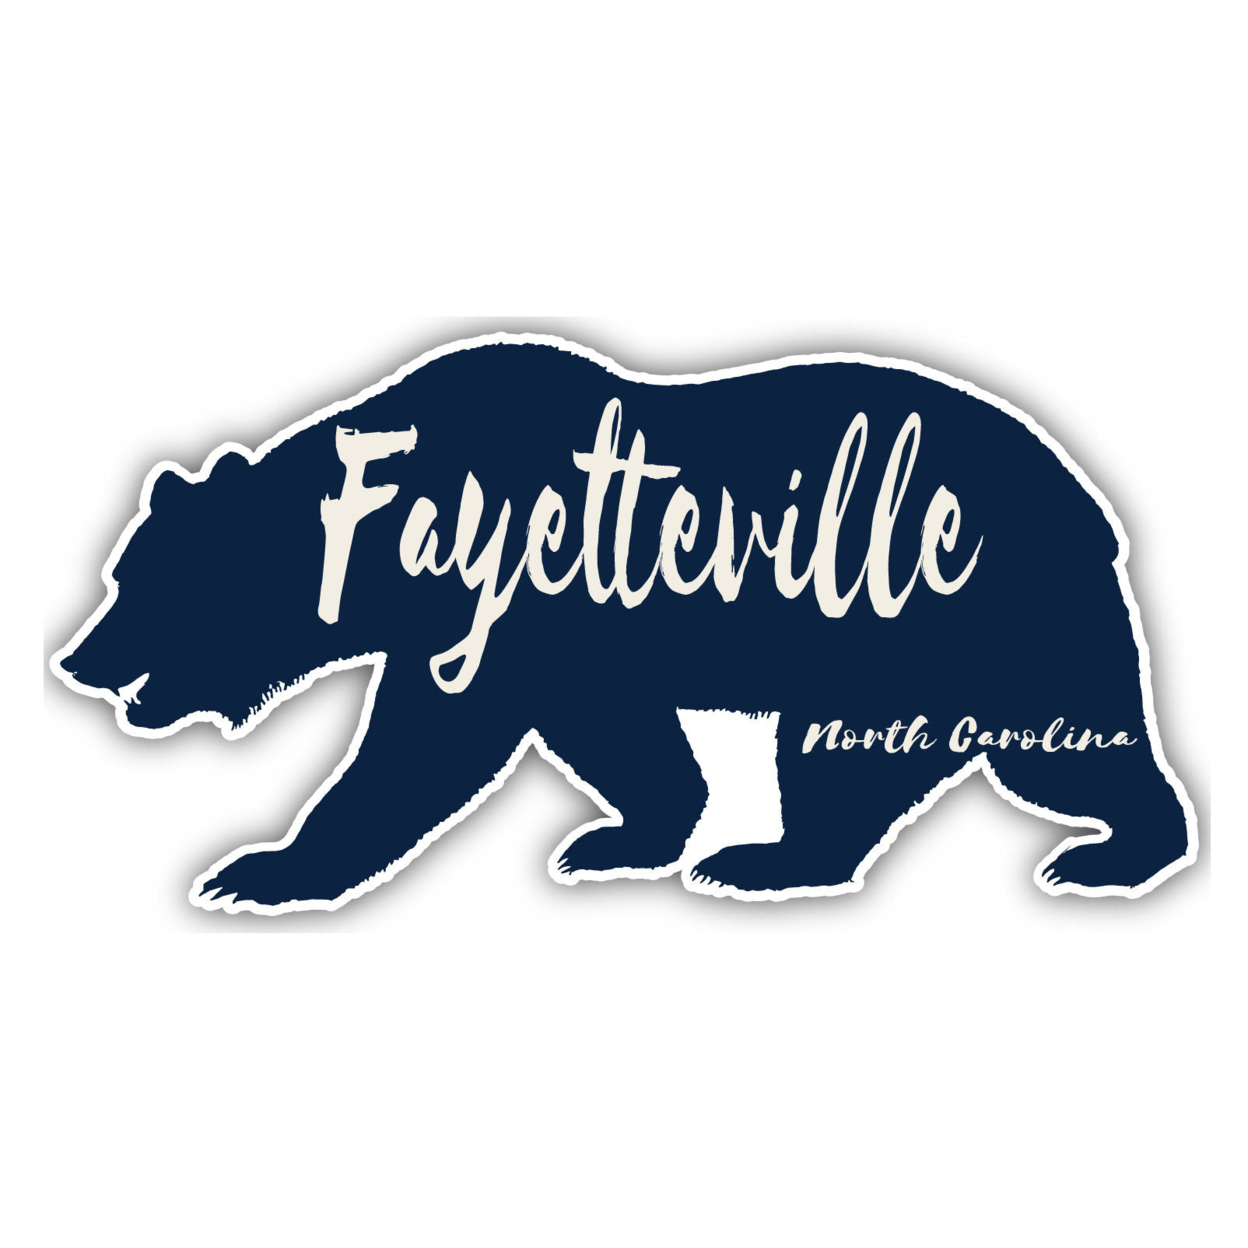 Fayetteville North Carolina Souvenir Decorative Stickers (Choose Theme And Size) - 4-Pack, 6-Inch, Tent